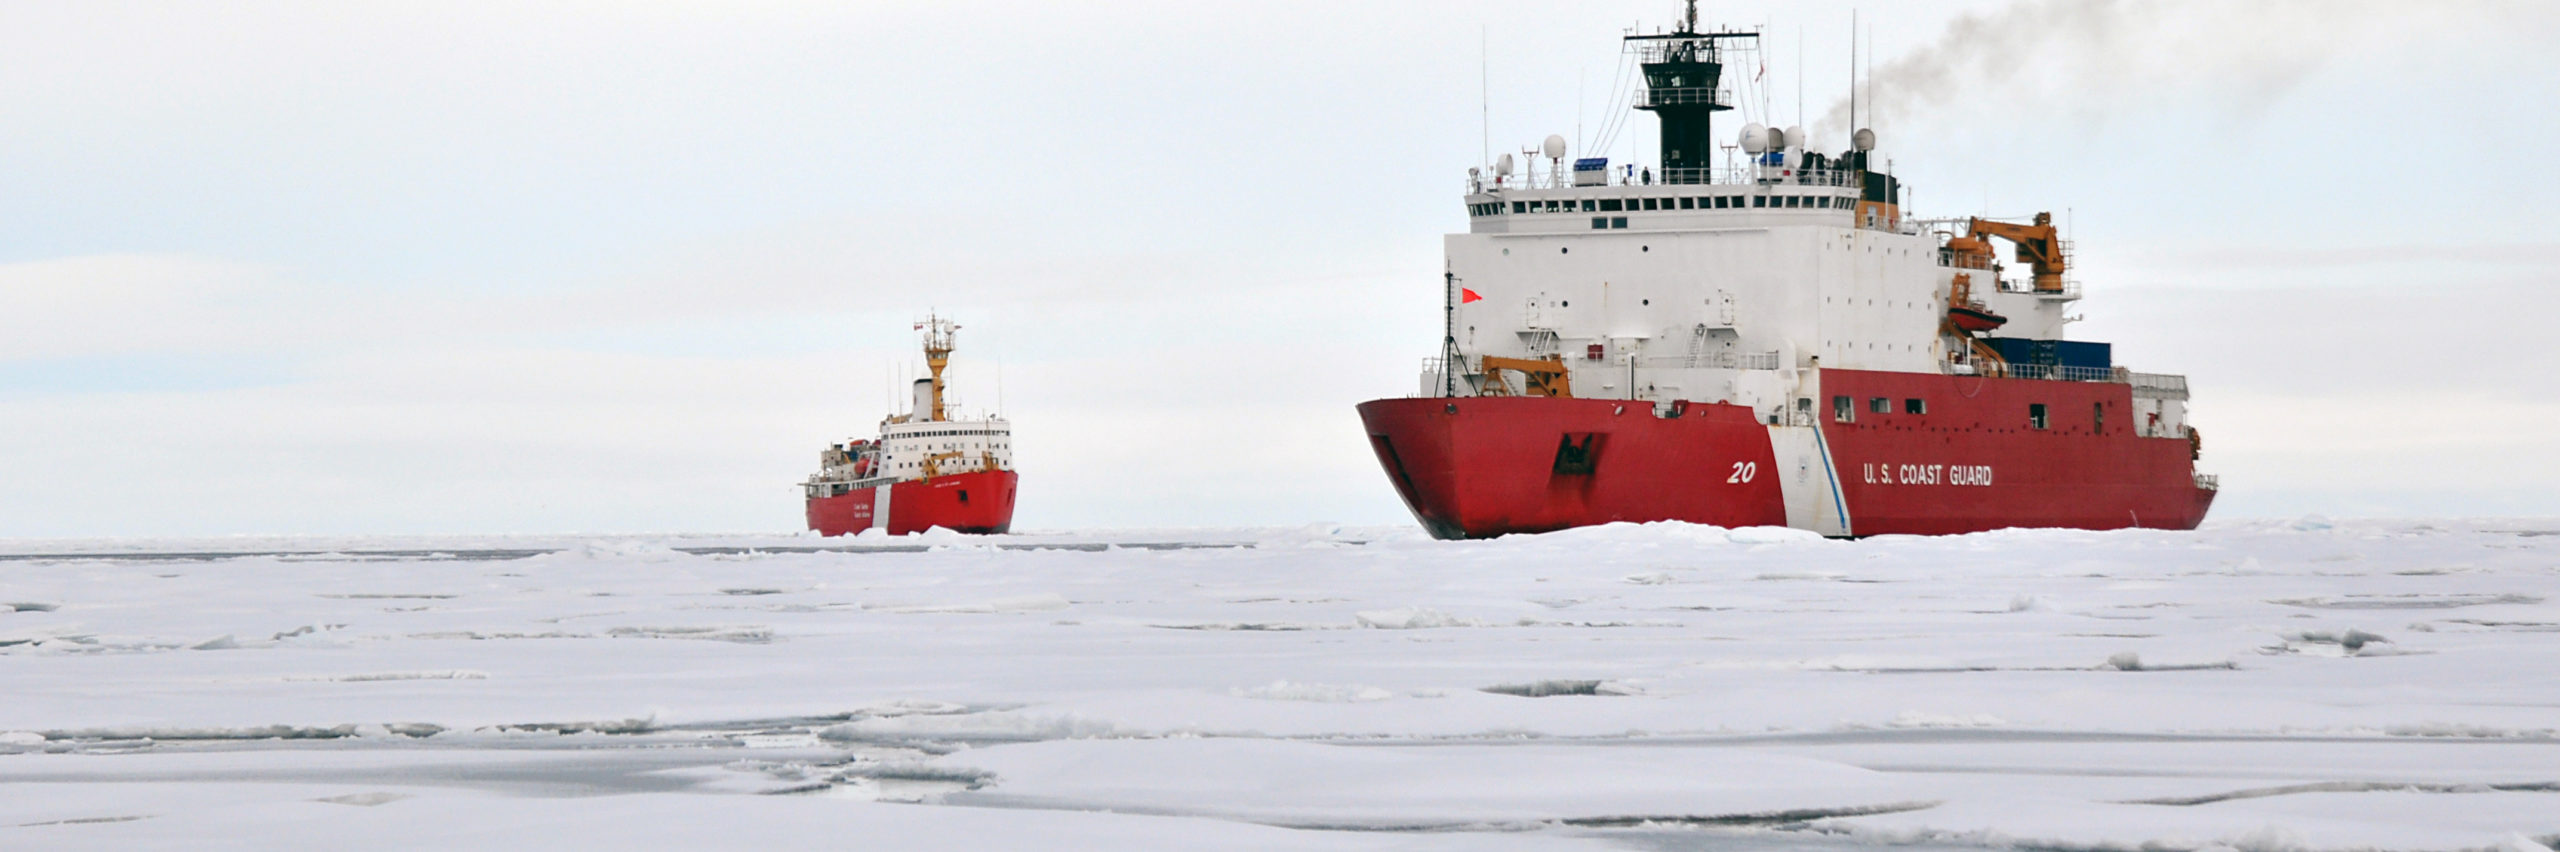 the U.S. Coast Guard Cutter Healy and the Canadian Coast Guard Cutter Louis S Saint Laurent operating in Arctic sea ice, as seen from the ice level